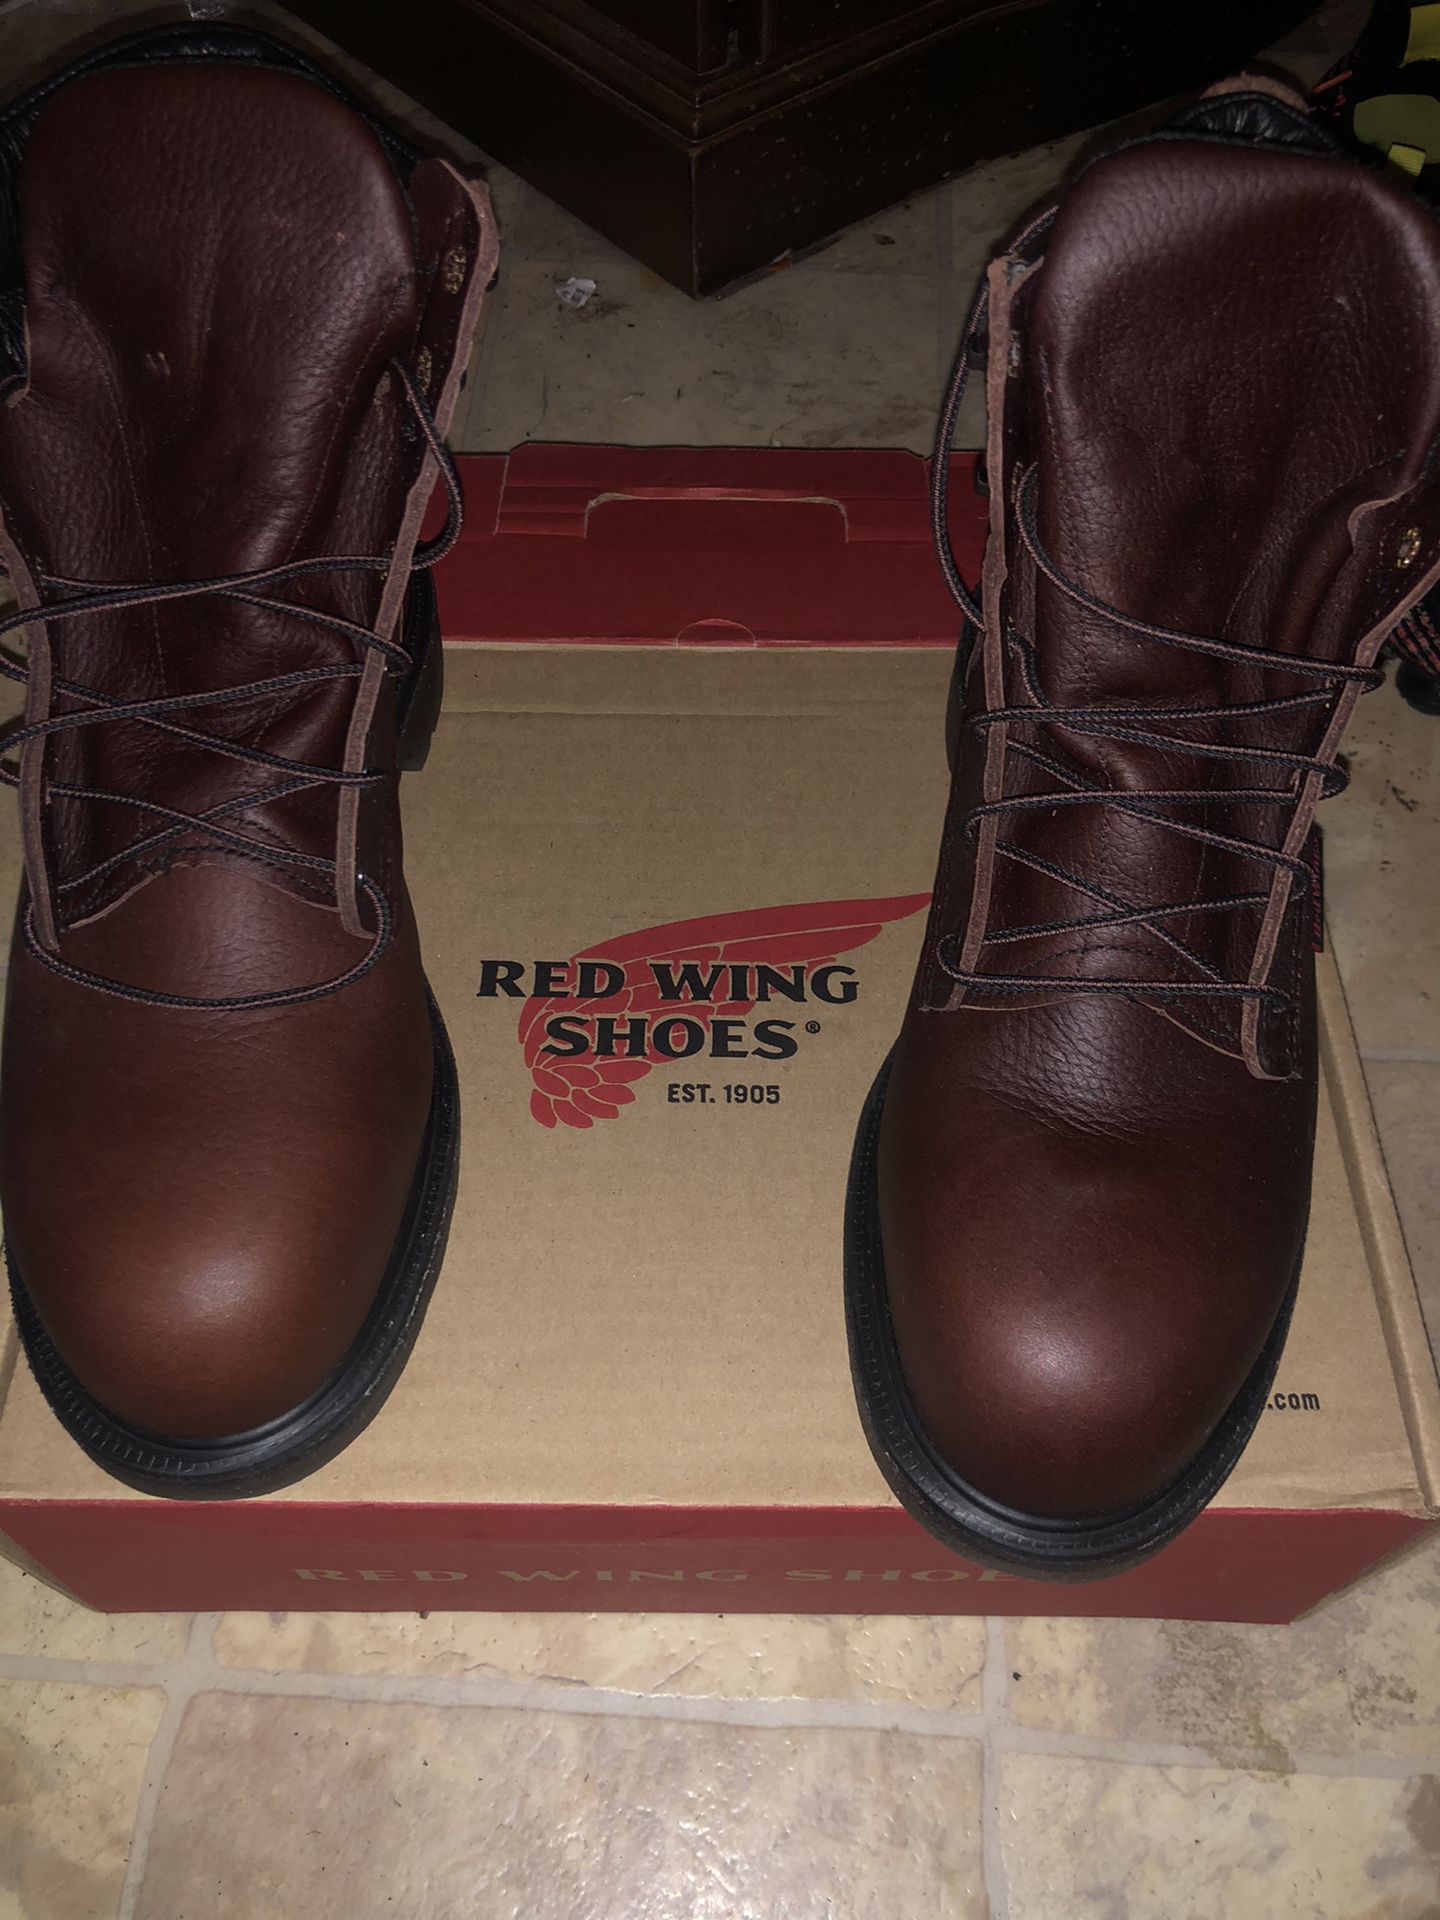 RED WING SIZE 10 1/2 SUPER SOLE 2.0 6 INCHES TALL BRAMD NEW